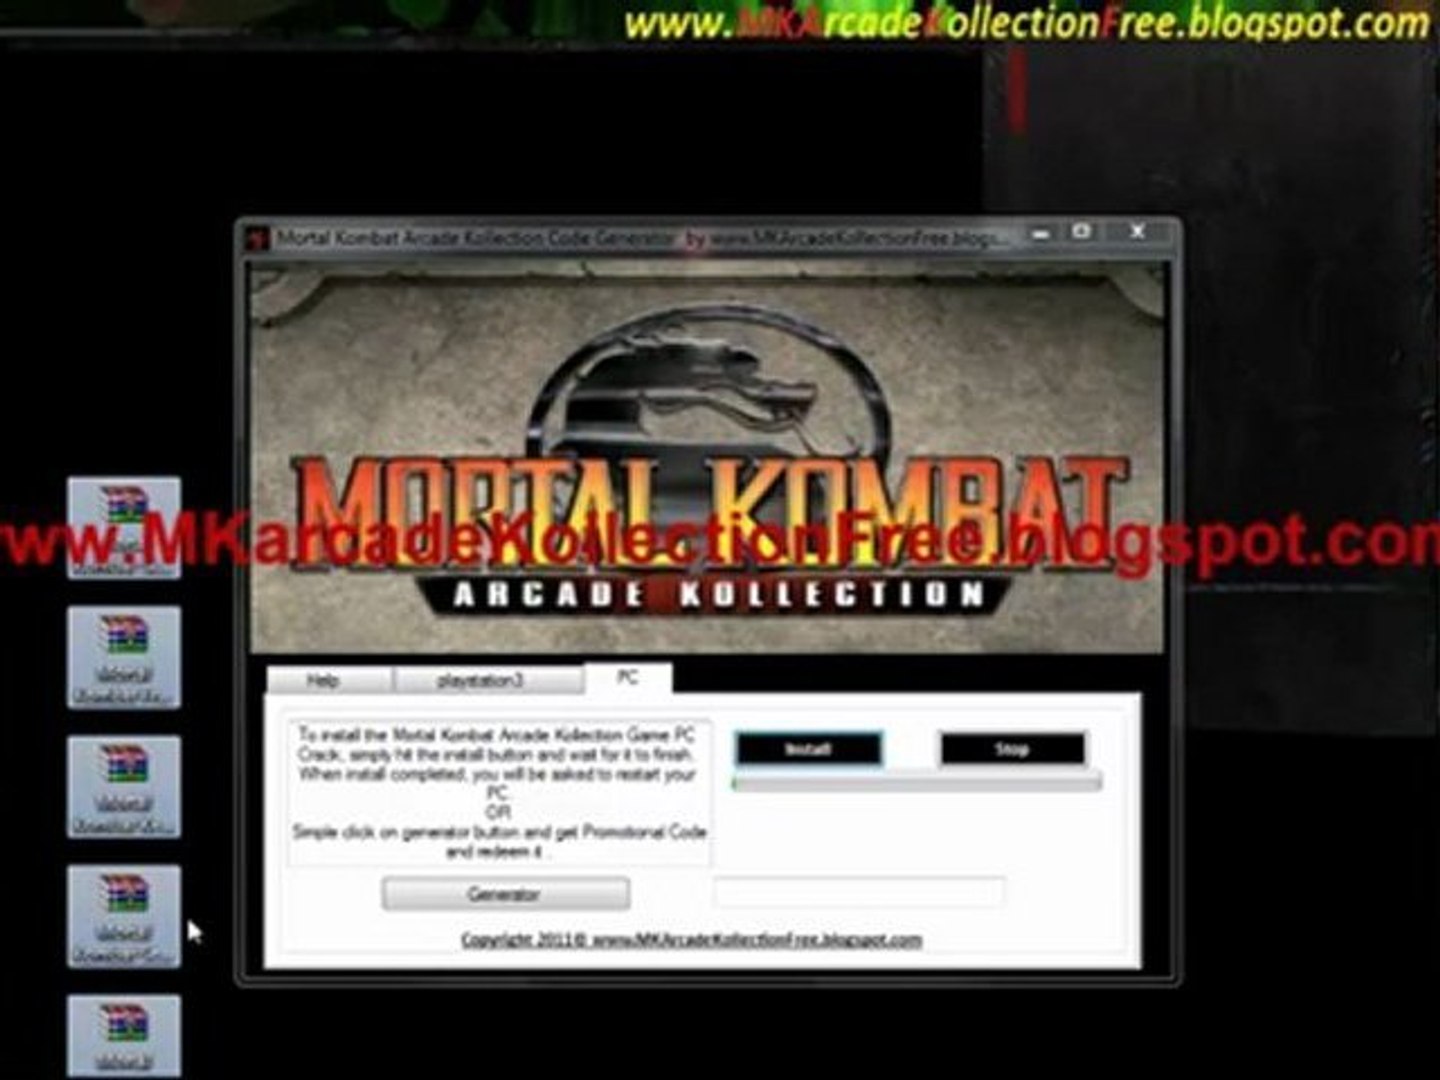 How to install Mortal Kombat Arcade Kollection on Xbox 360 - PS3